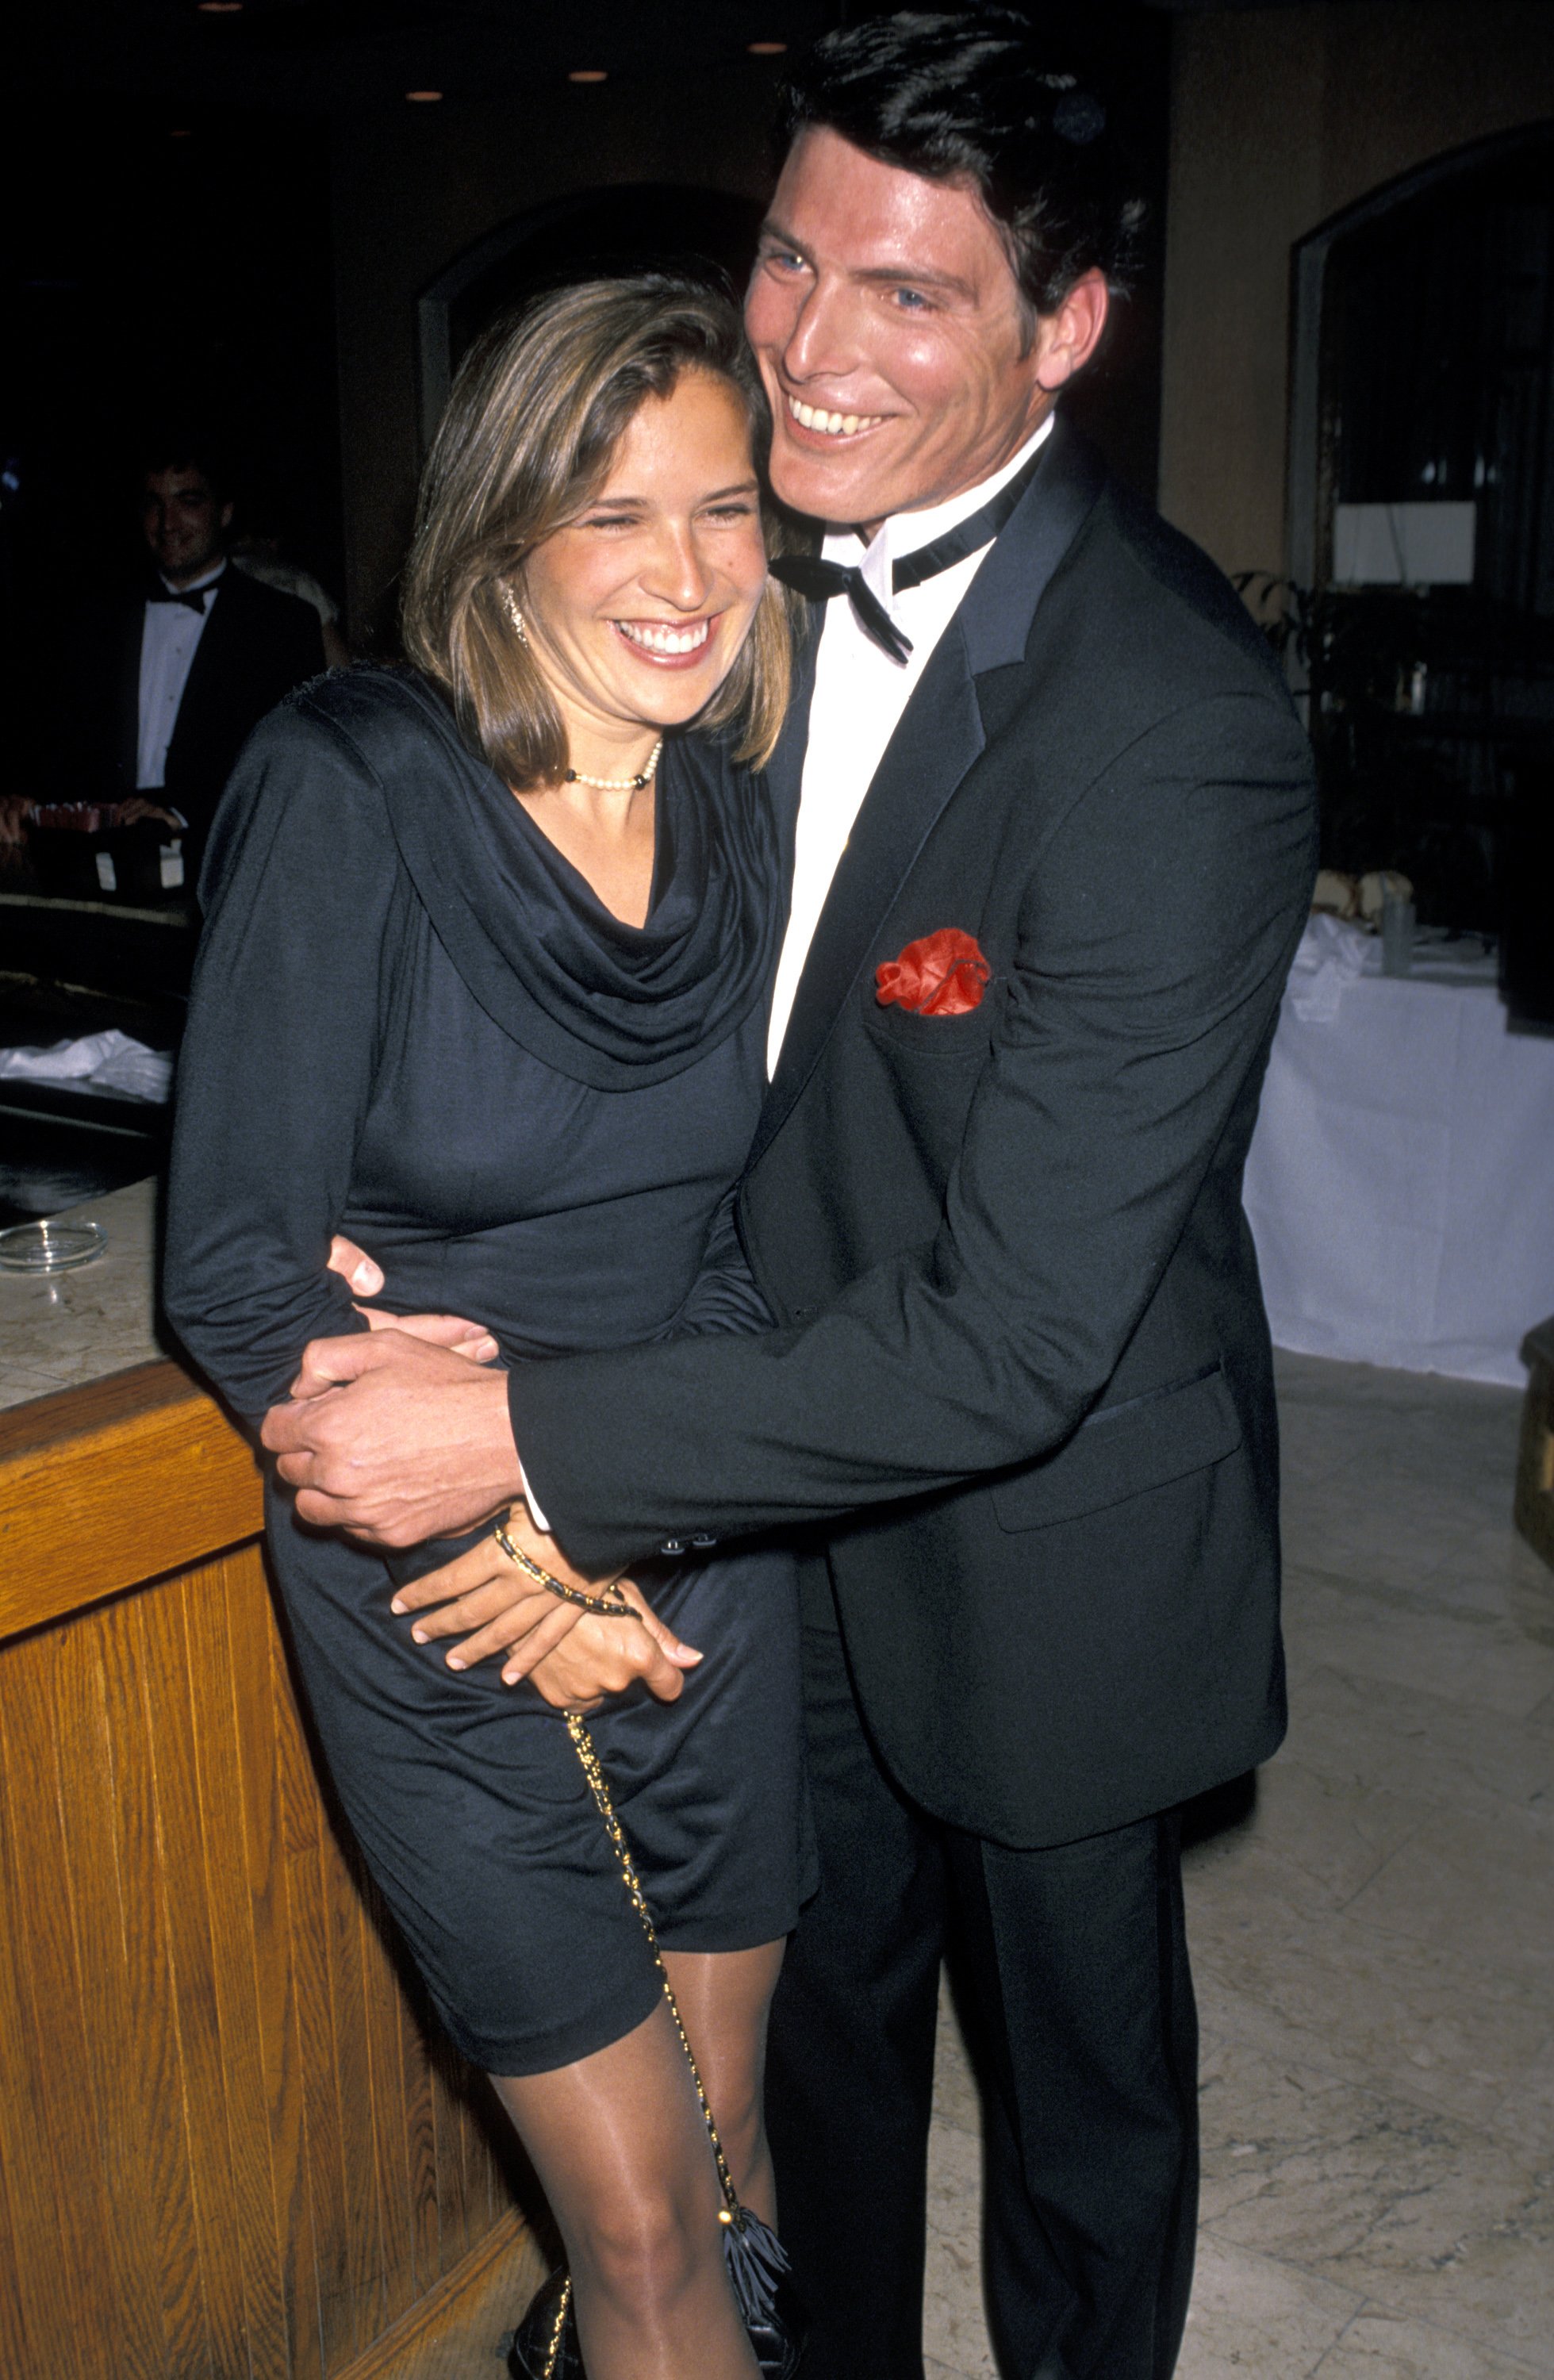 Dana Reeve and Christopher Reeveat the 44th Annual Tony Awards in 1990 | Source: Getty Images